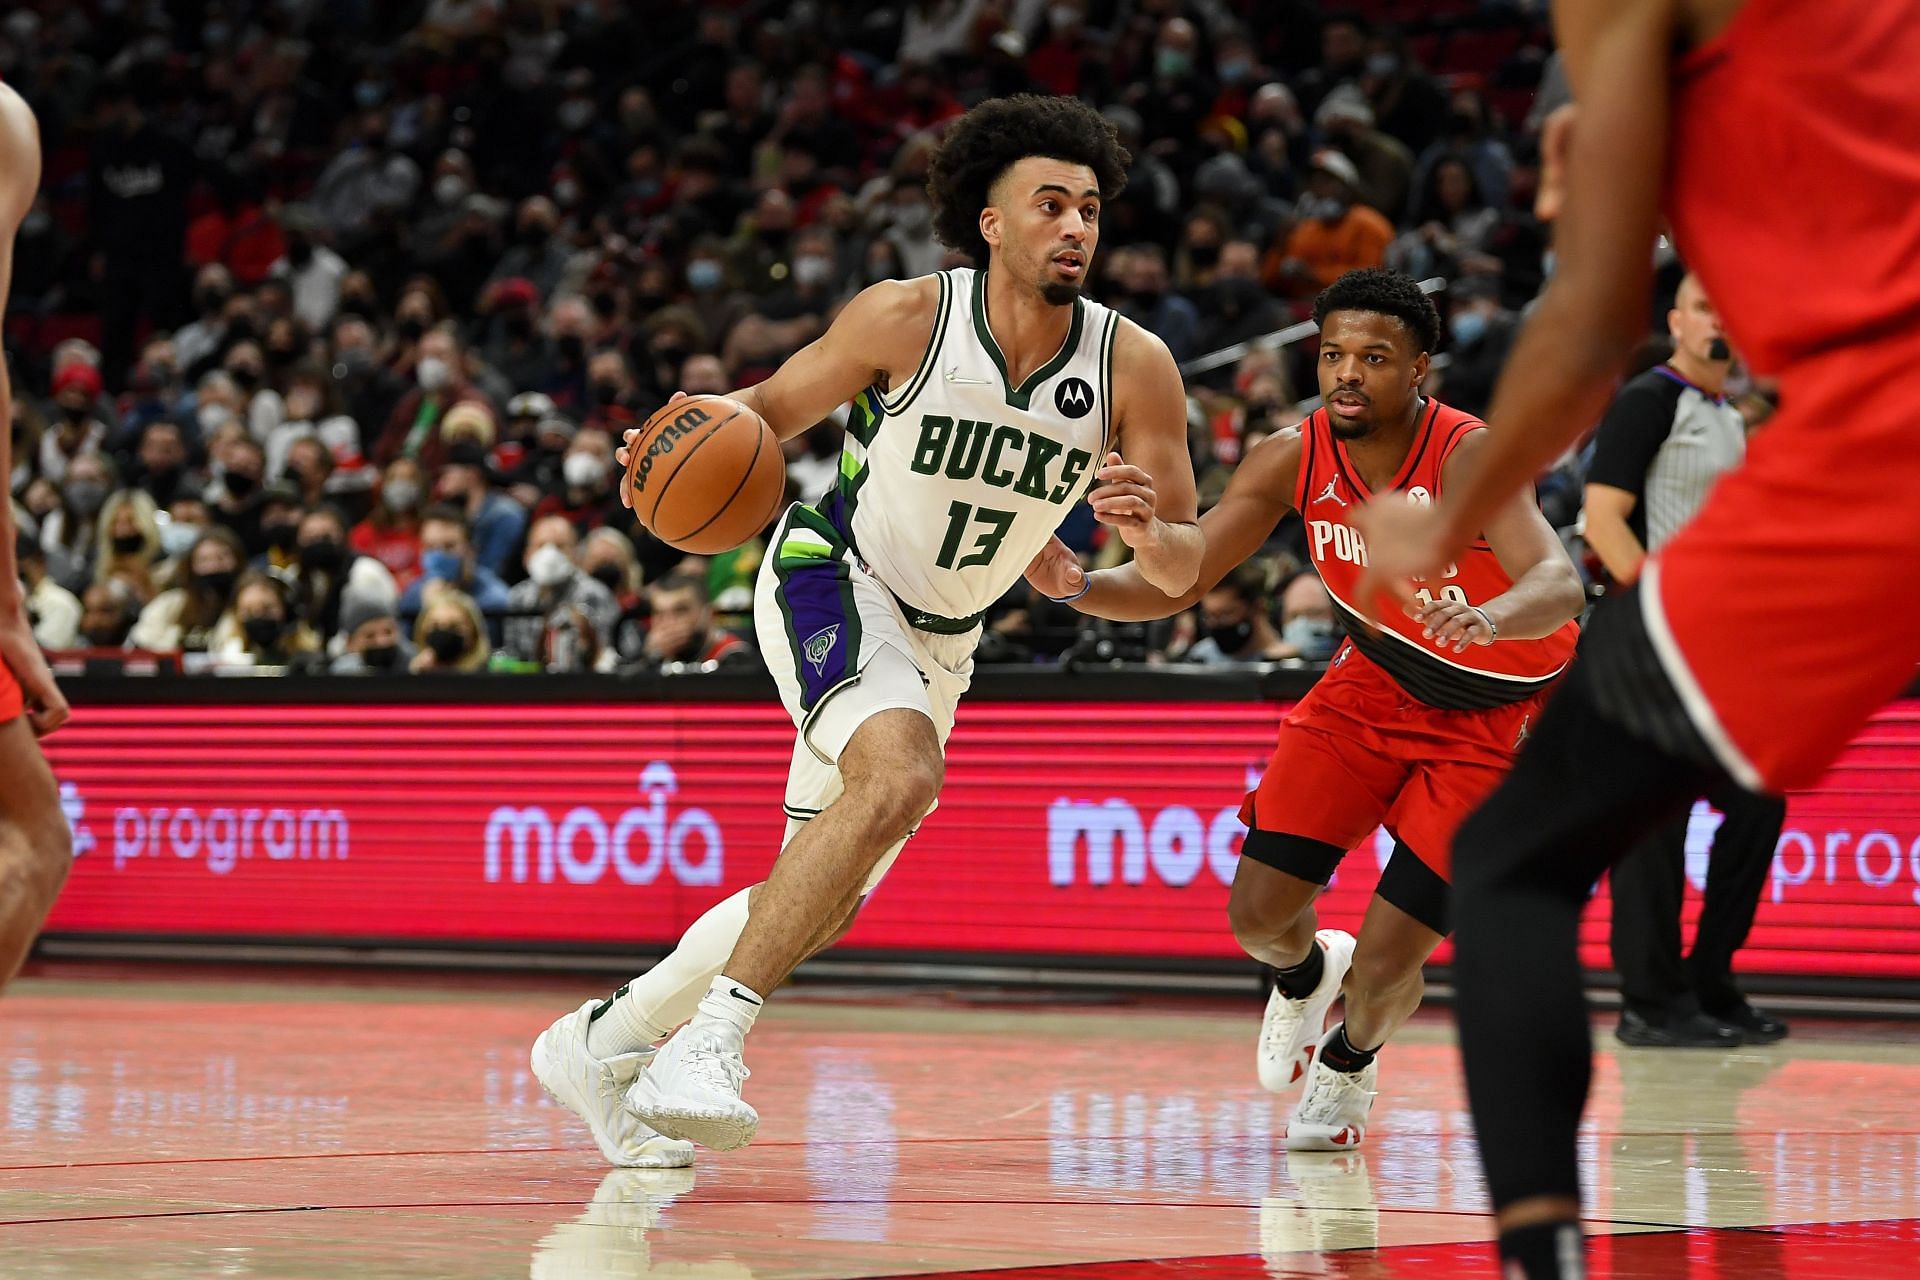 Jordan Nwora #13 of the Bucks drives to the basket during the fourth quarter against the Portland Trail Blazers at the Moda Center on February 05, 2022 in Portland, Oregon. The Milwaukee Bucks won 137-108.